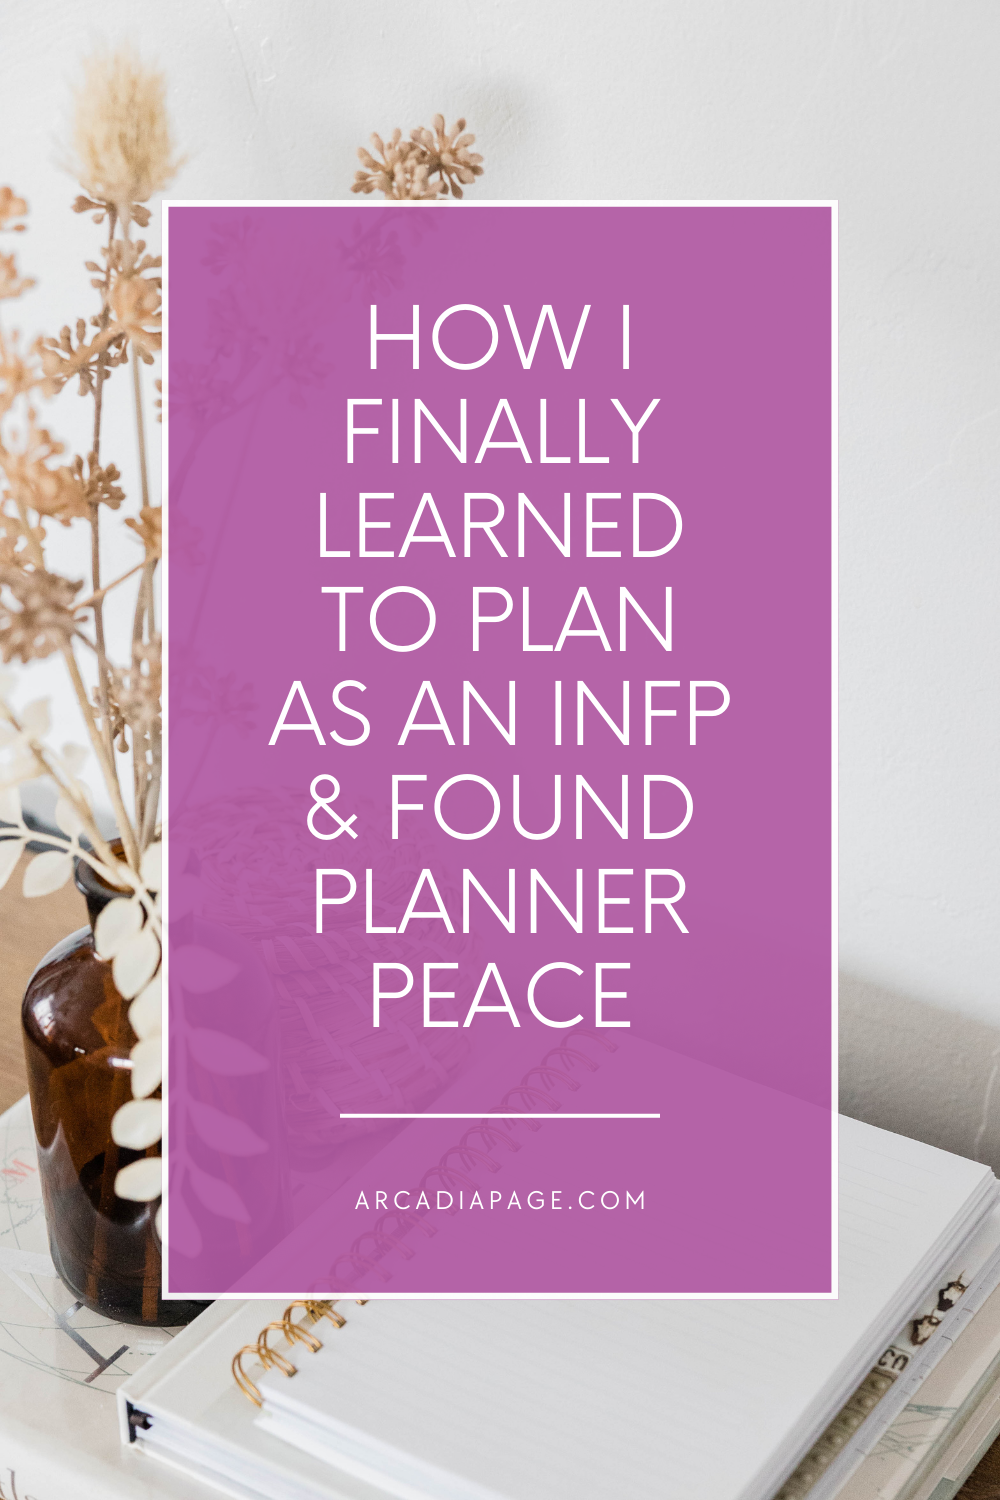 INFP planning and finding planner peace